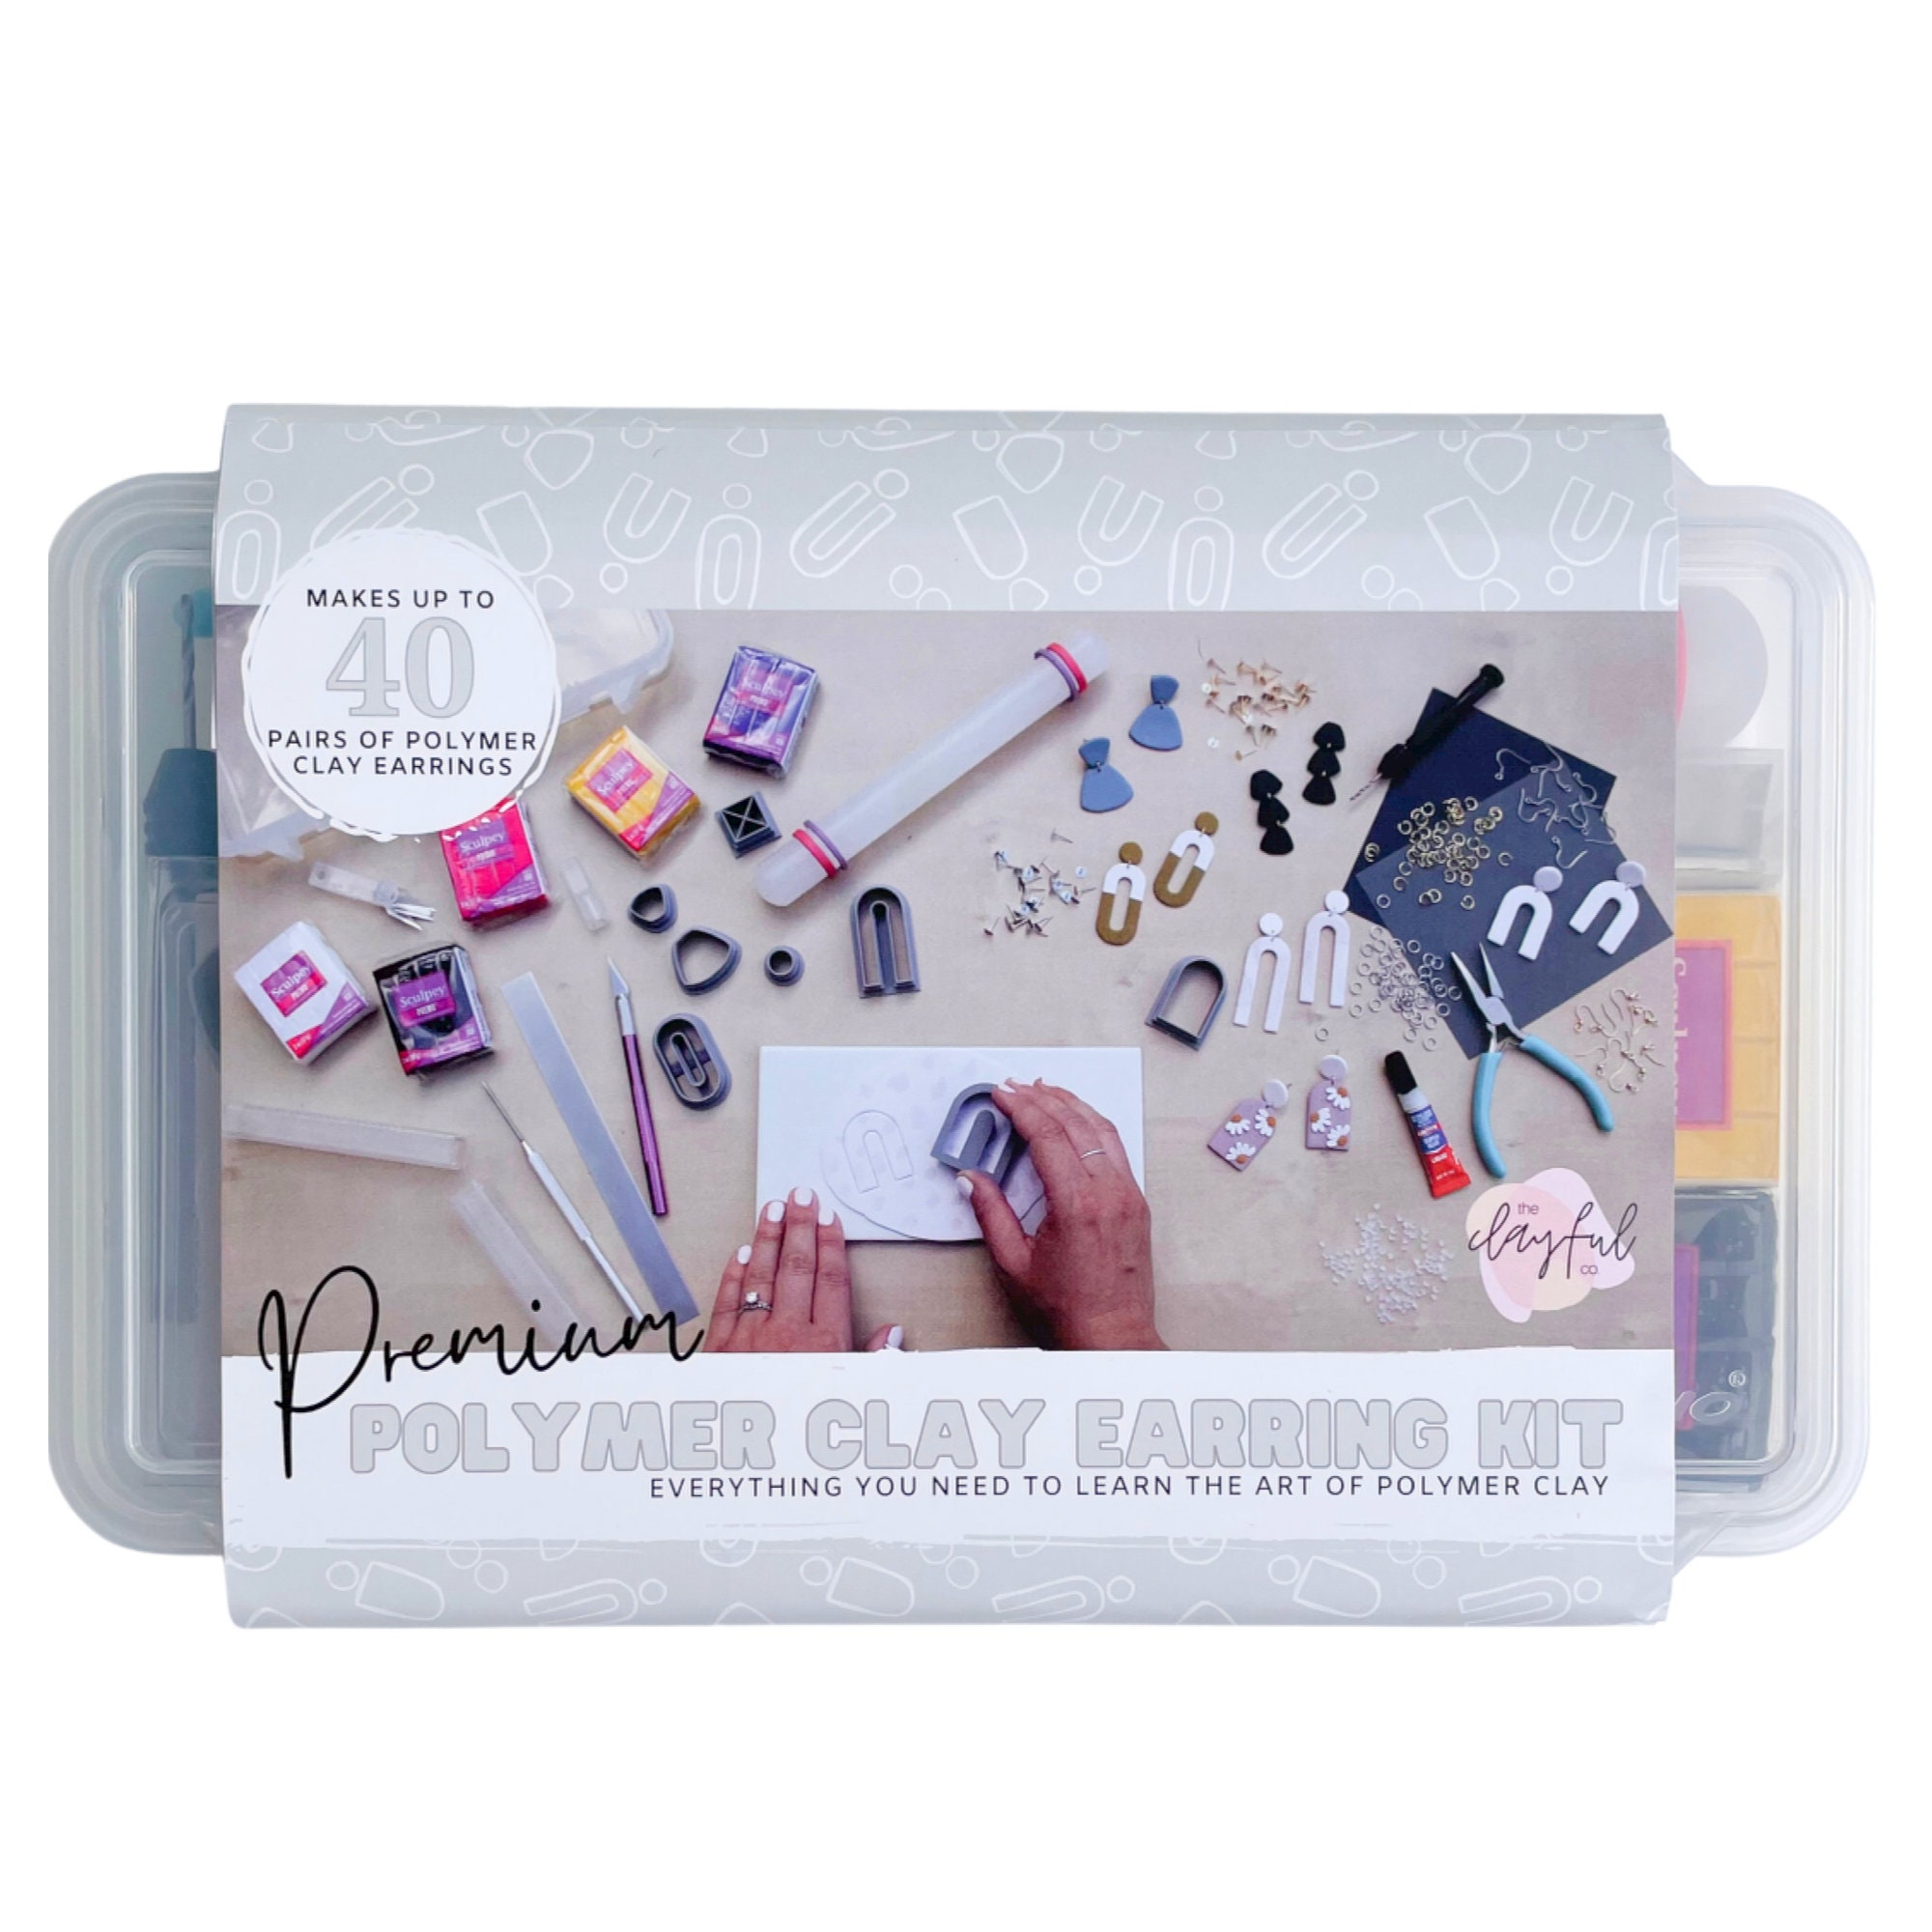 Craftmaker Create Your Own Polymer Clay Jewelry Kit|Other Format